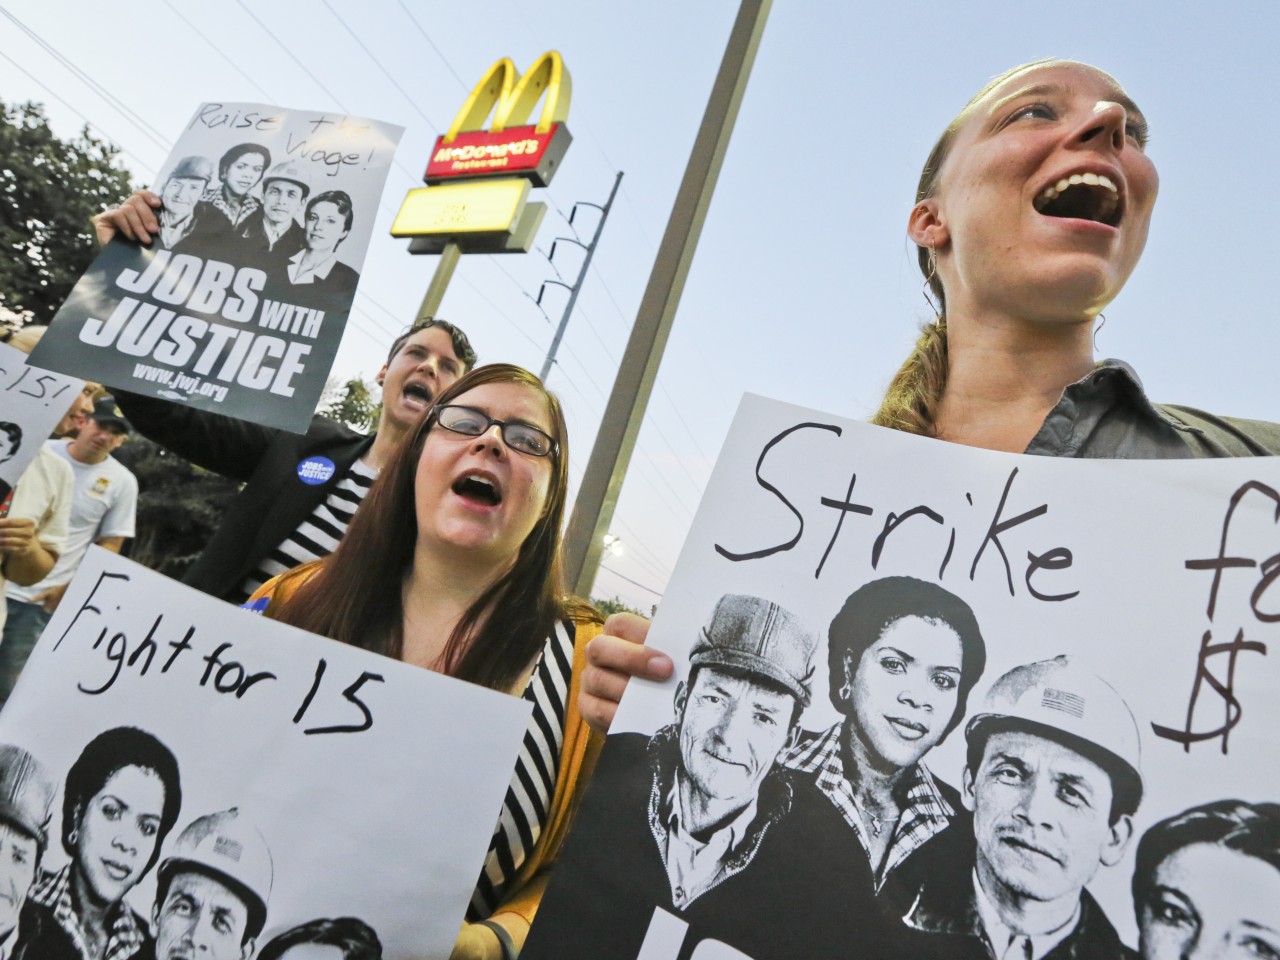 fast-food-workers-pay.jpeg1-1280x960